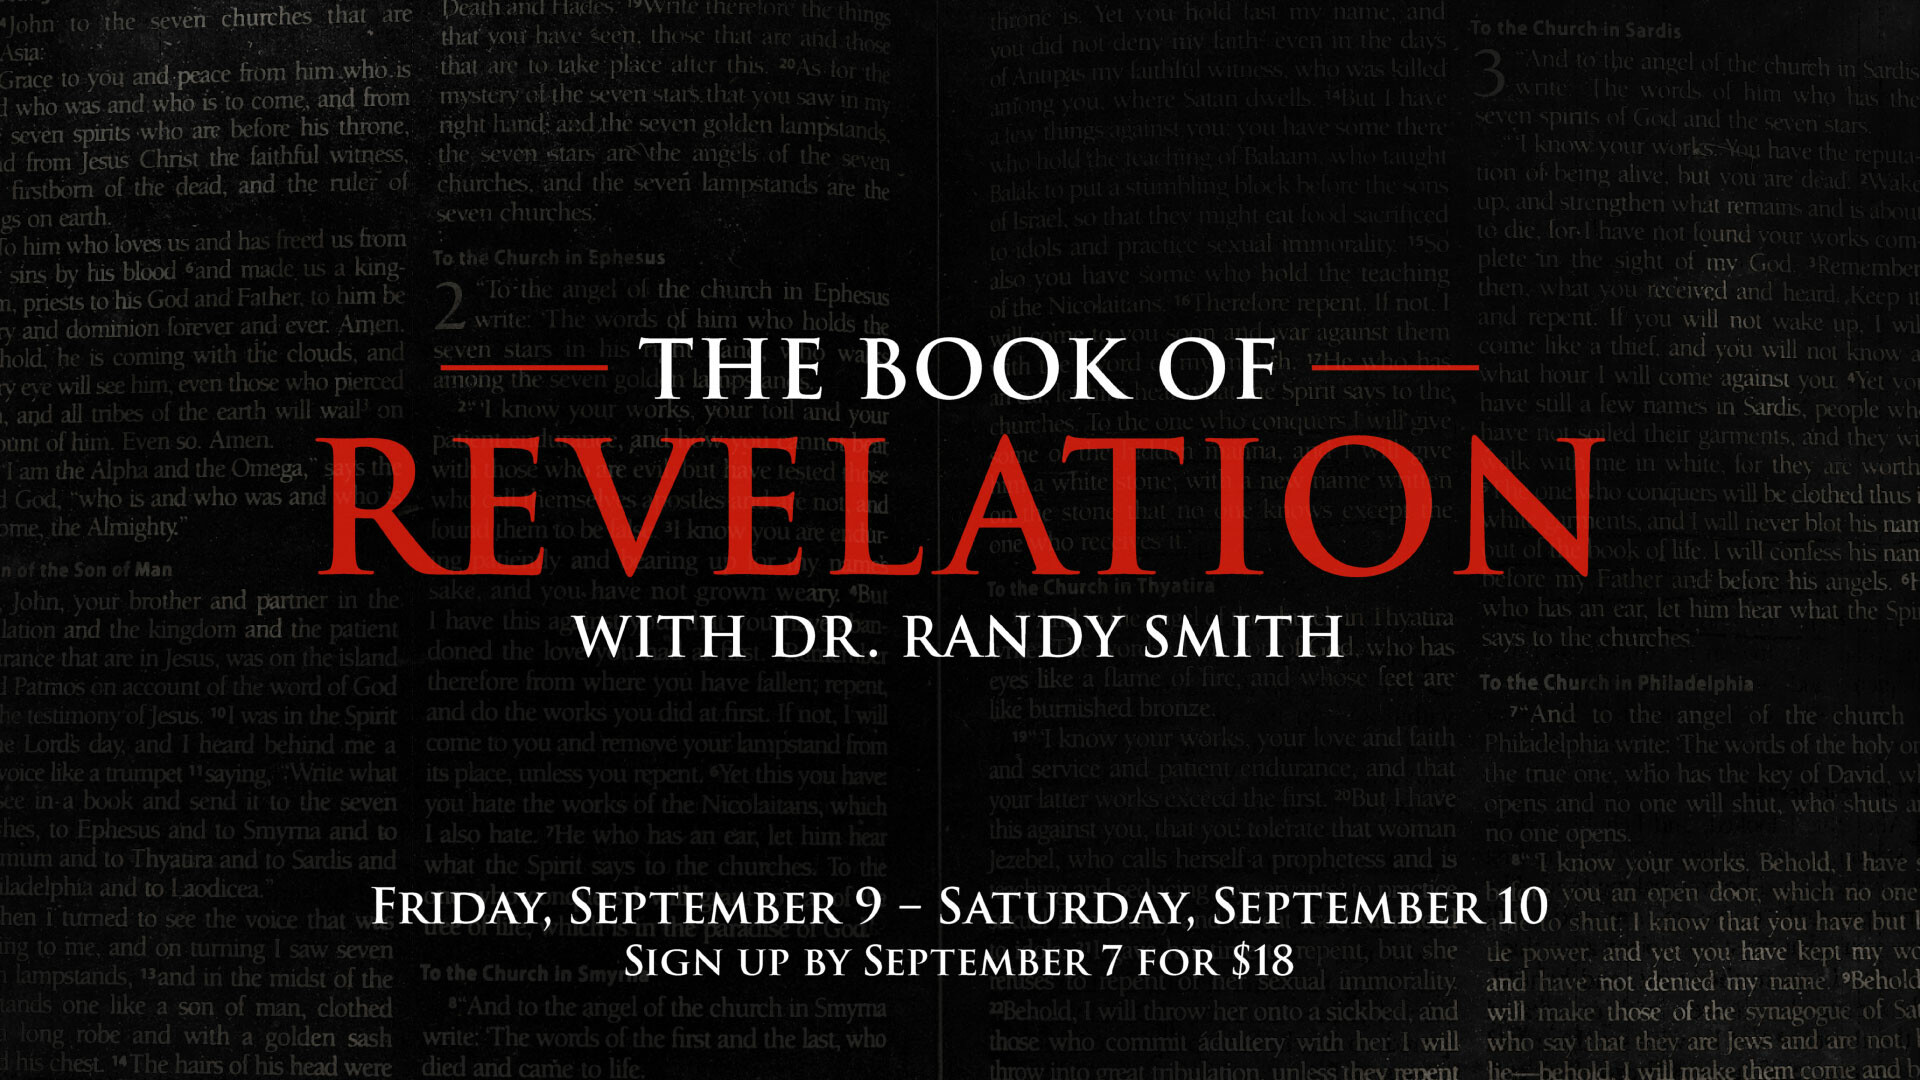 The Book of Revelation with Dr. Randy Smith